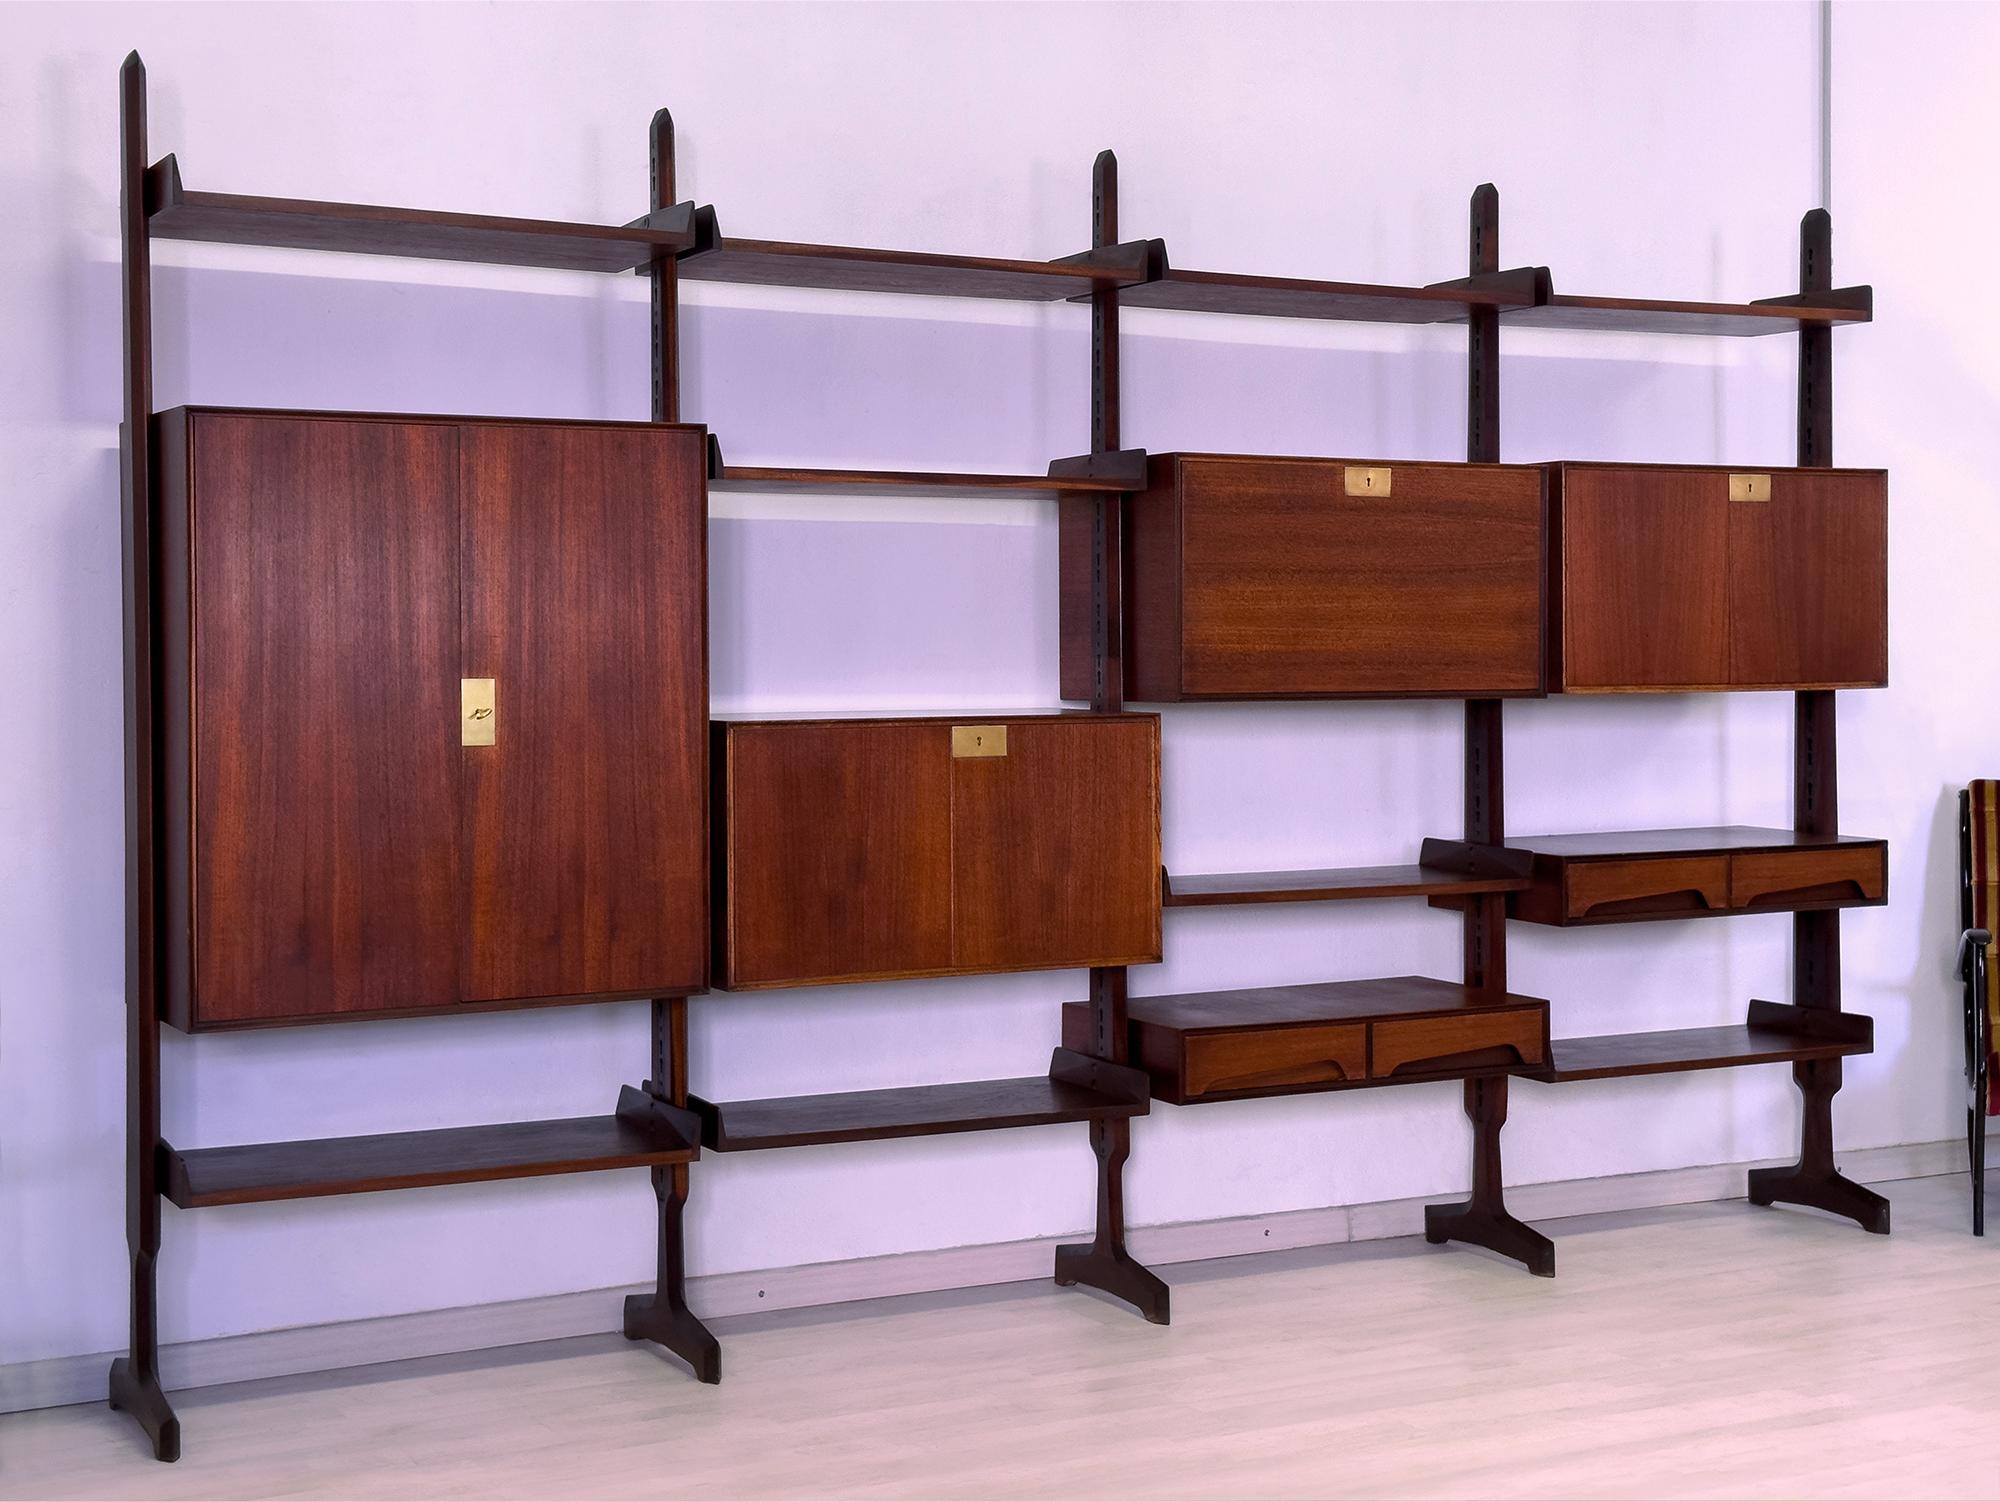 This bookcase consists of four modules freestanding, suitable to be moving and placed at will in the home.

It's composed by #5 uprights, and equipped with #9 shelves, #2 cabinets two doors, #2 cabinets with two drawers each one, #1 big cabinet two